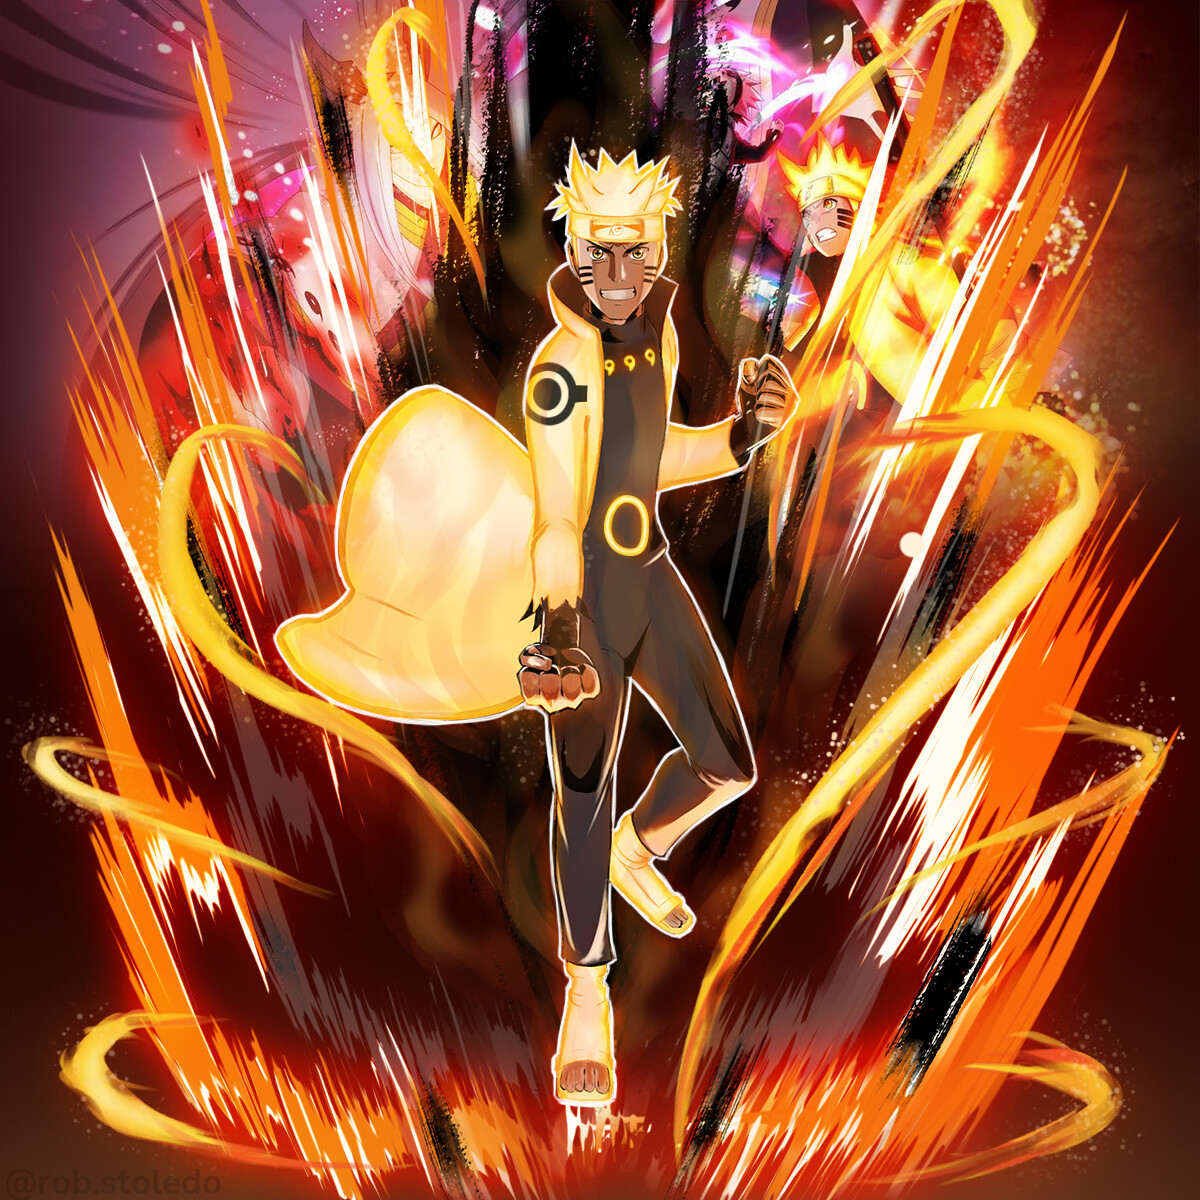 Drawing Naruto Shippuden Characters as Six Paths o by